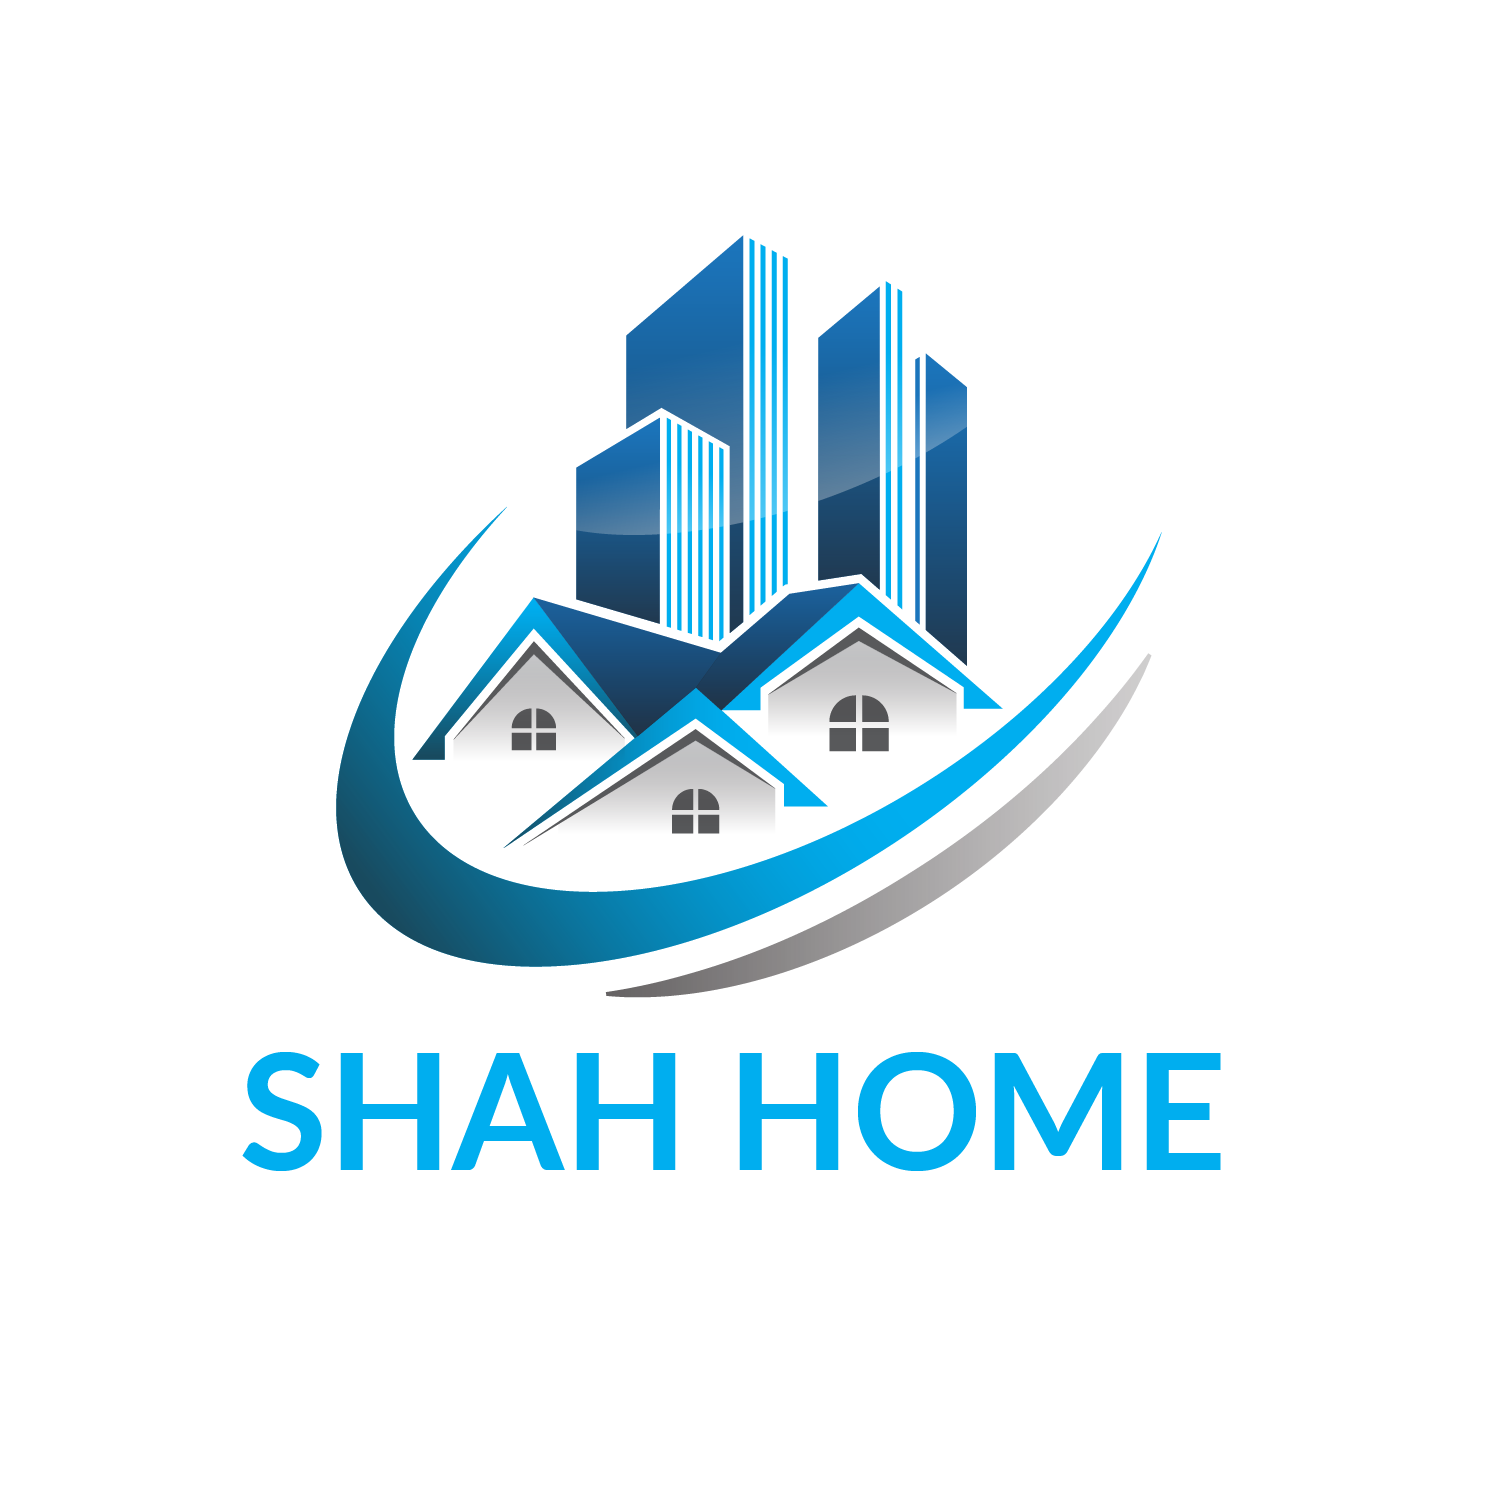 Shahhome